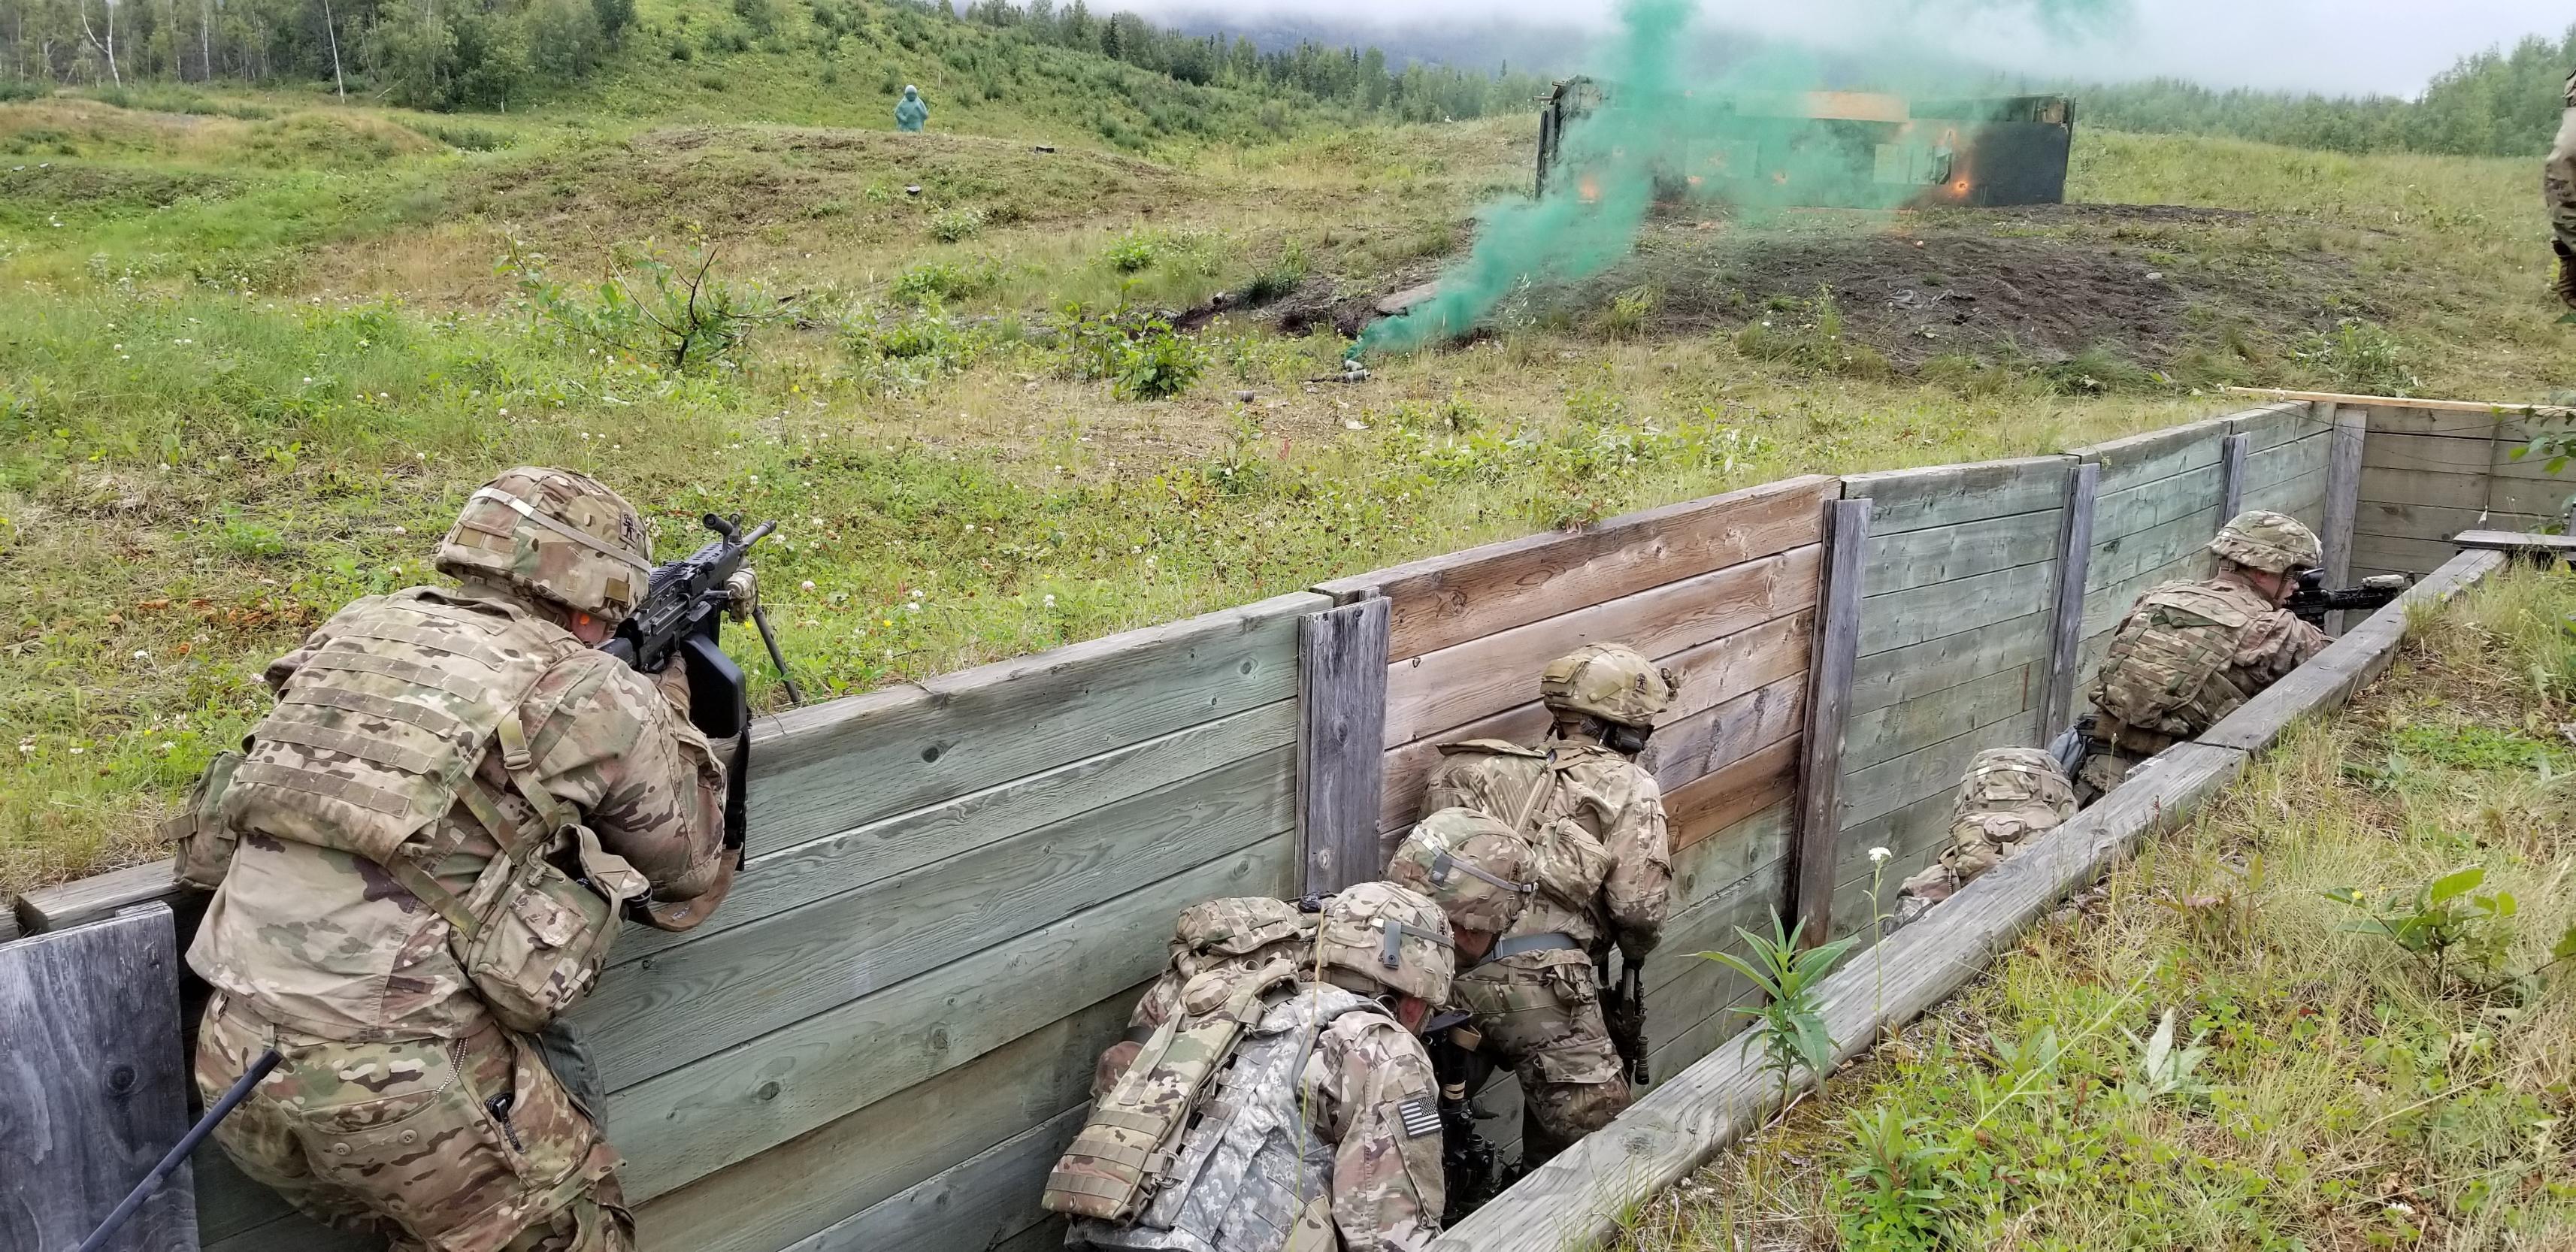 Paratrooper with 3rd Battalion, 509th Parachute Infantry Regiment, move through a trench as they assault a simulated bunker using the "SOSRA" technique 15 Aug., 2018, at Joint Base Elmendorf-Richardson. SOSRA is an acronym for Suppress, Obscure, Secure, Reduce, Assault. The terms describe the steps paratroopers take to take down an enemy bunker.